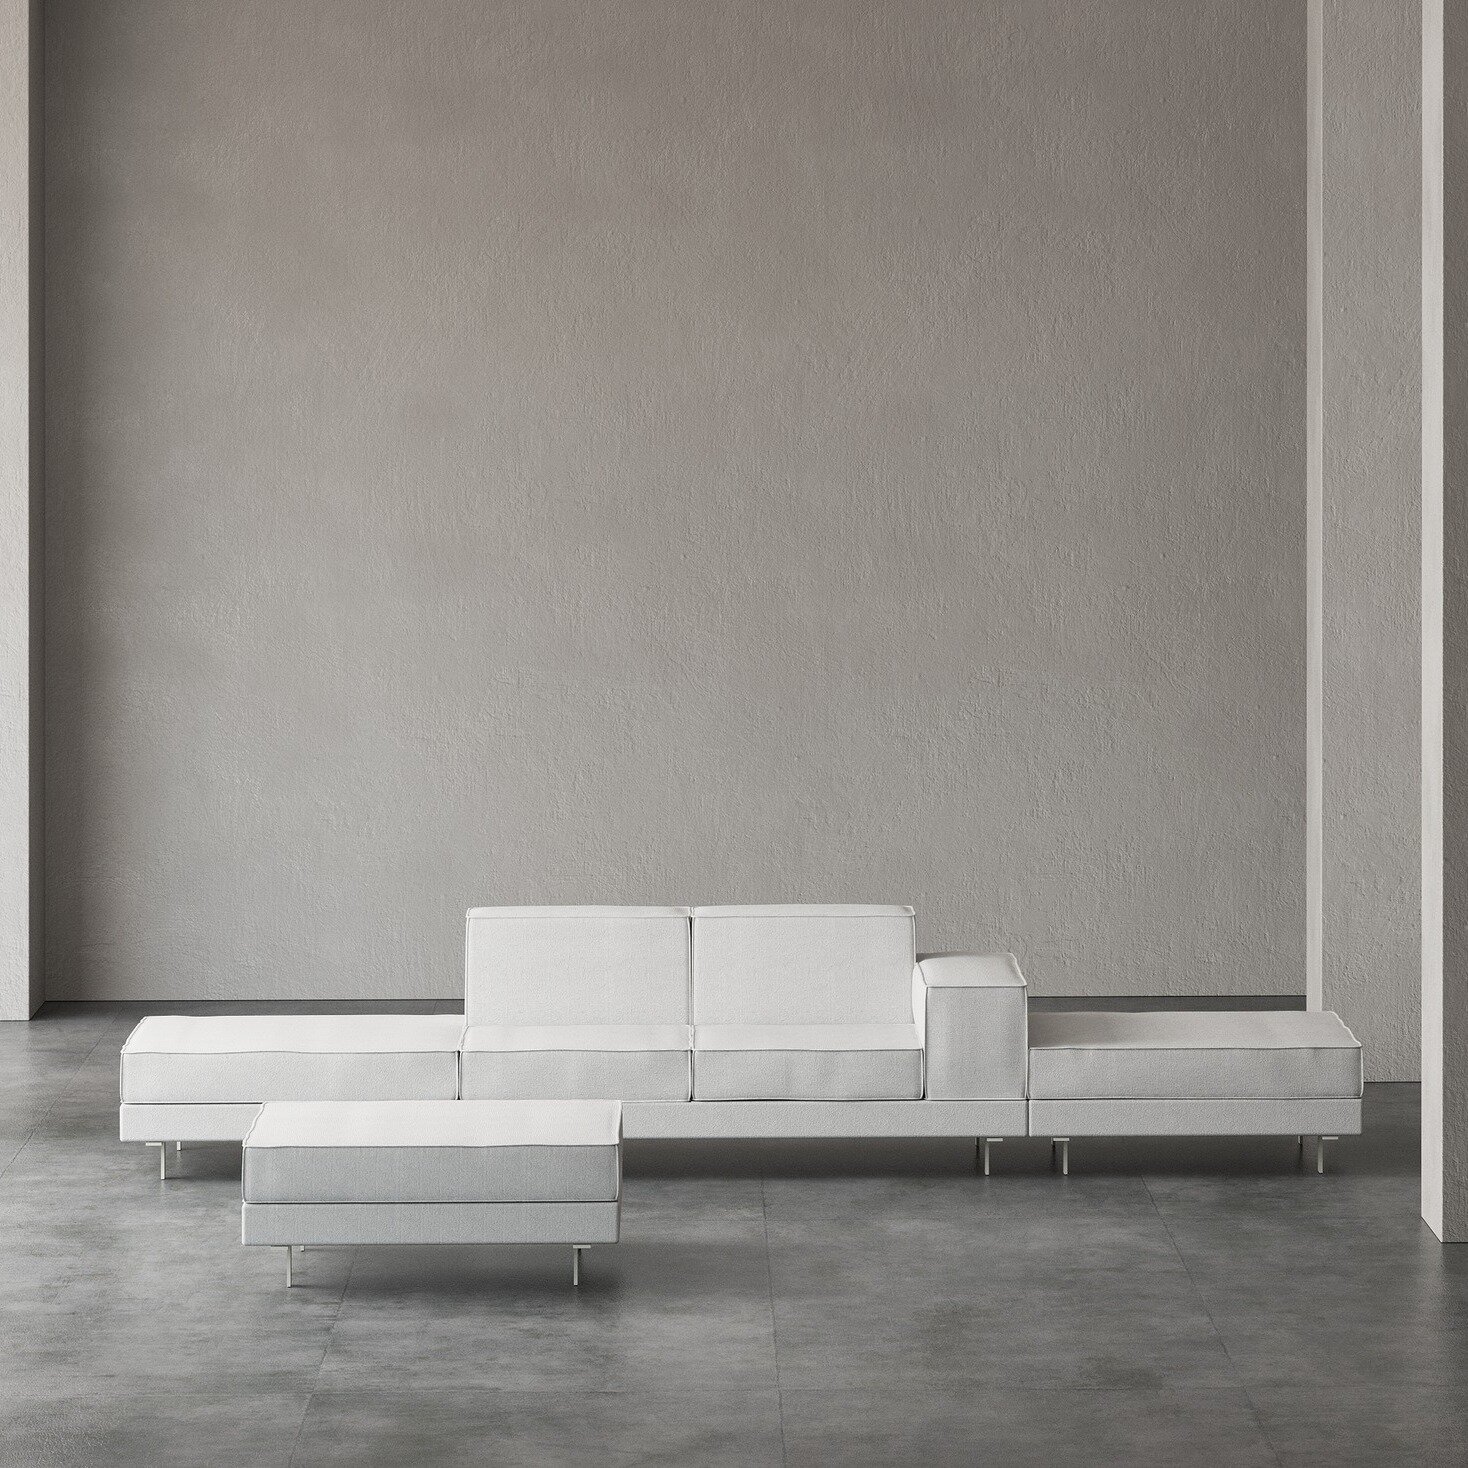 &quot;This sofa is inspired by the &ldquo;stereo system&rdquo; which is a combination of different &ldquo;mixed sound layers&rdquo; that together play a 3D feeling of asymmetrical sounds in a room.
This new sofa system made for lounge areas of public